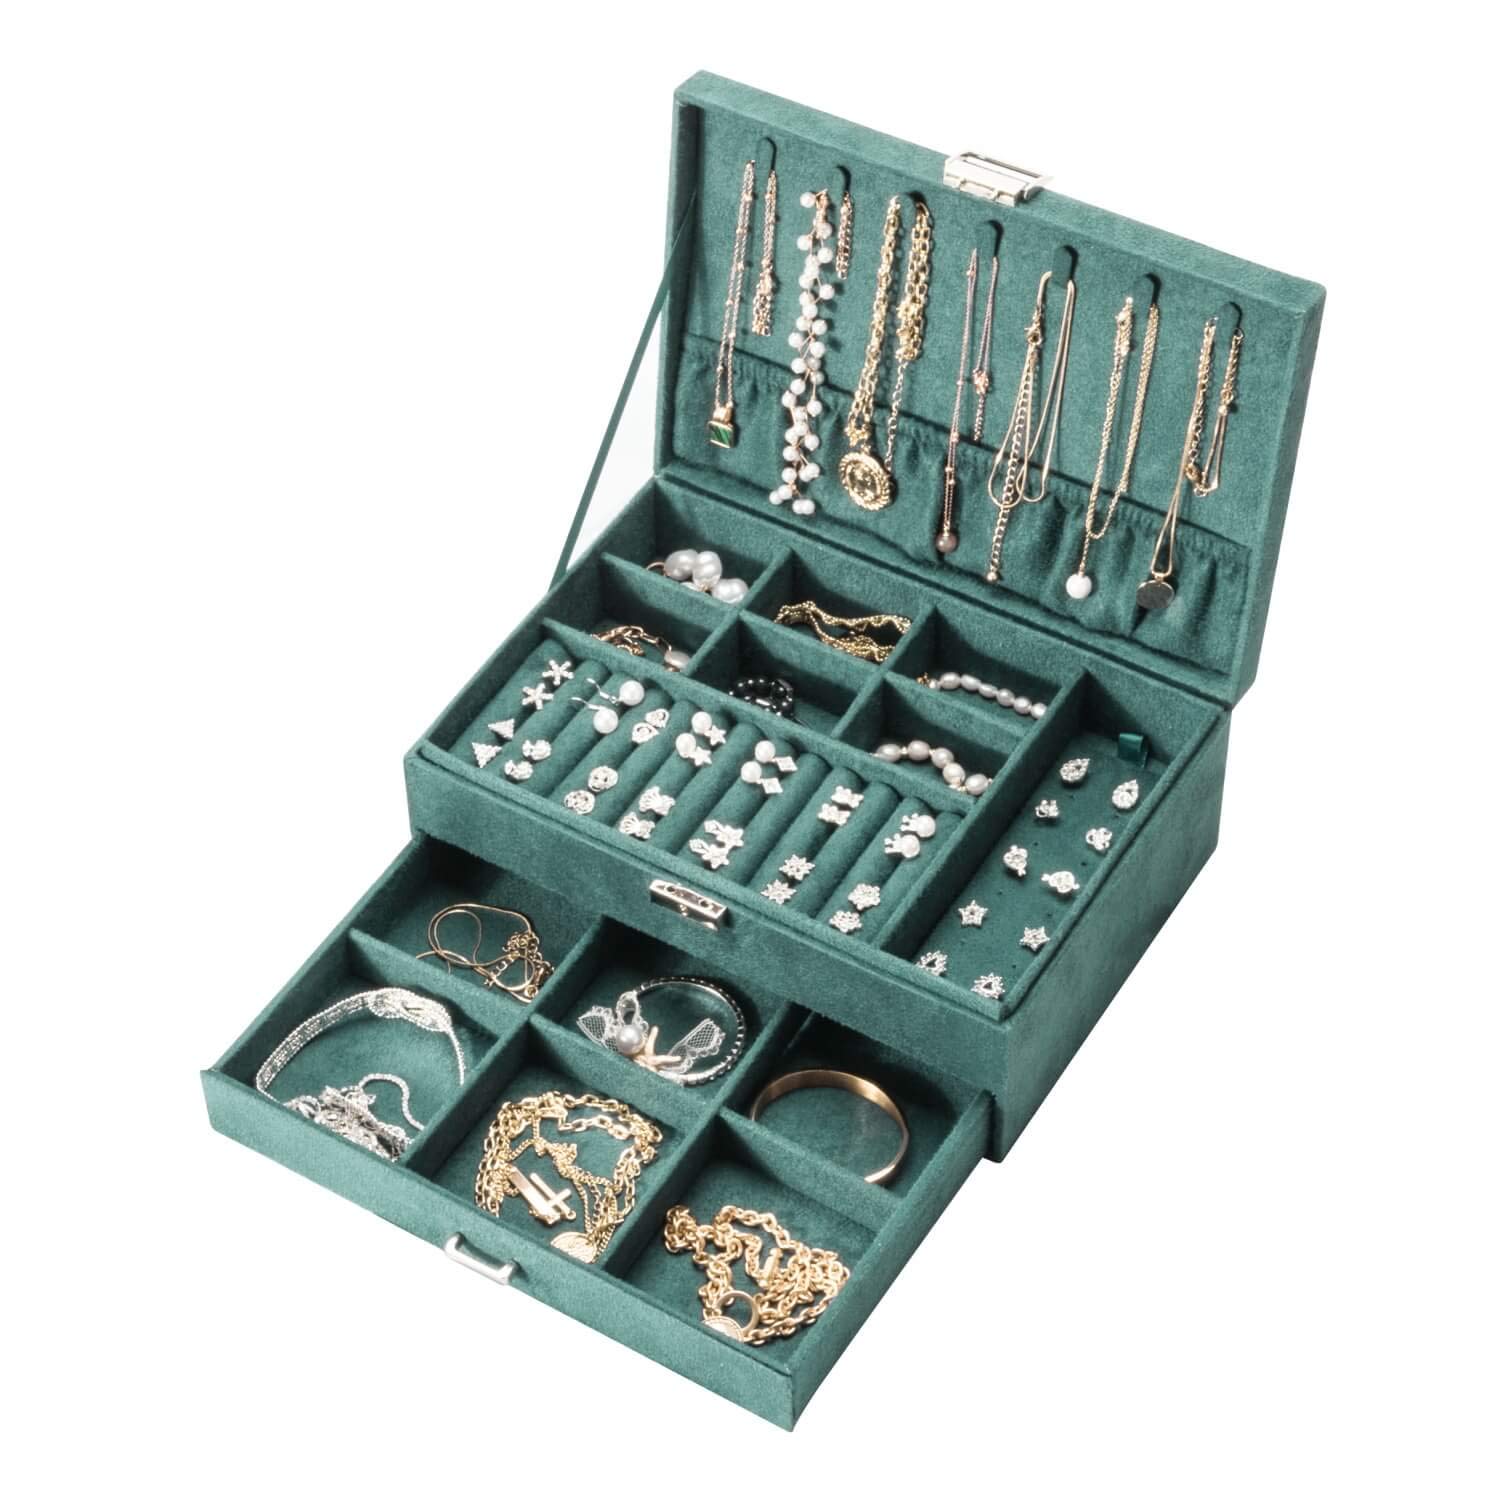 Amasava Jewellery Box,Large Jewellery Organiser with Drawer, Jewellery Storage Case for Necklaces Earrings Bracelets and Rings, Wedding Birthday Box for Women Girls (Green)